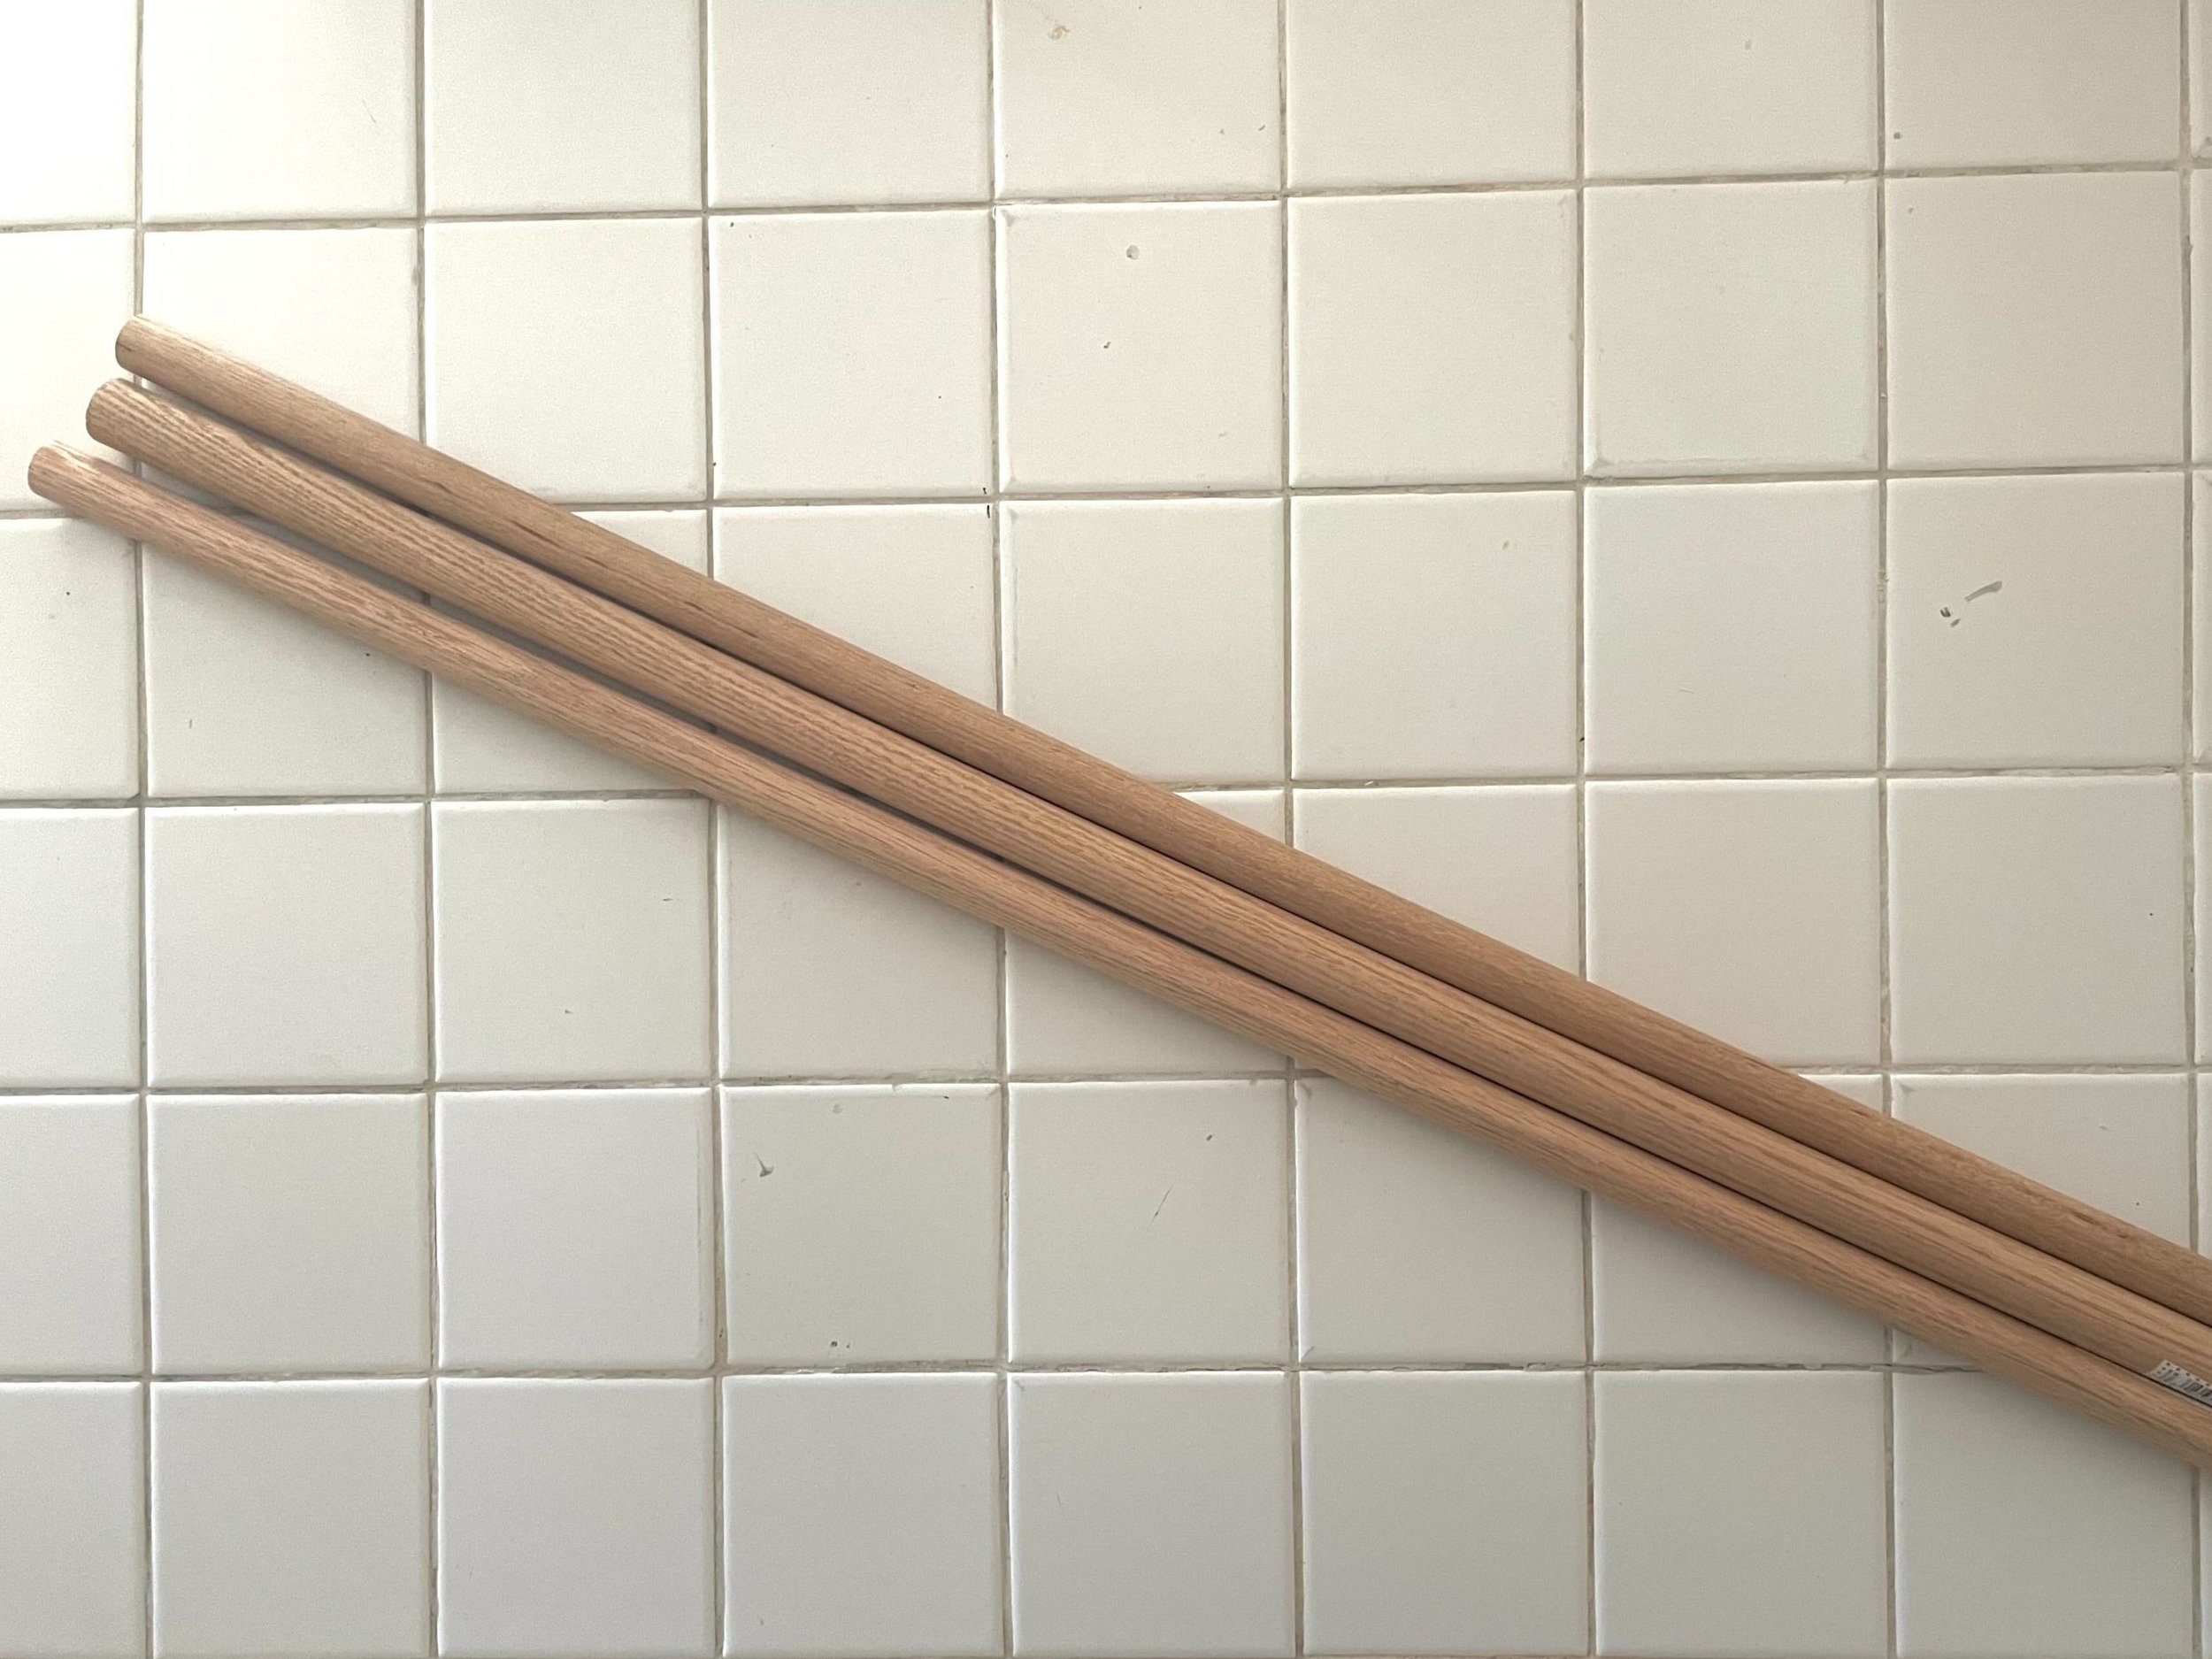 1 to 3 Dowel Rods